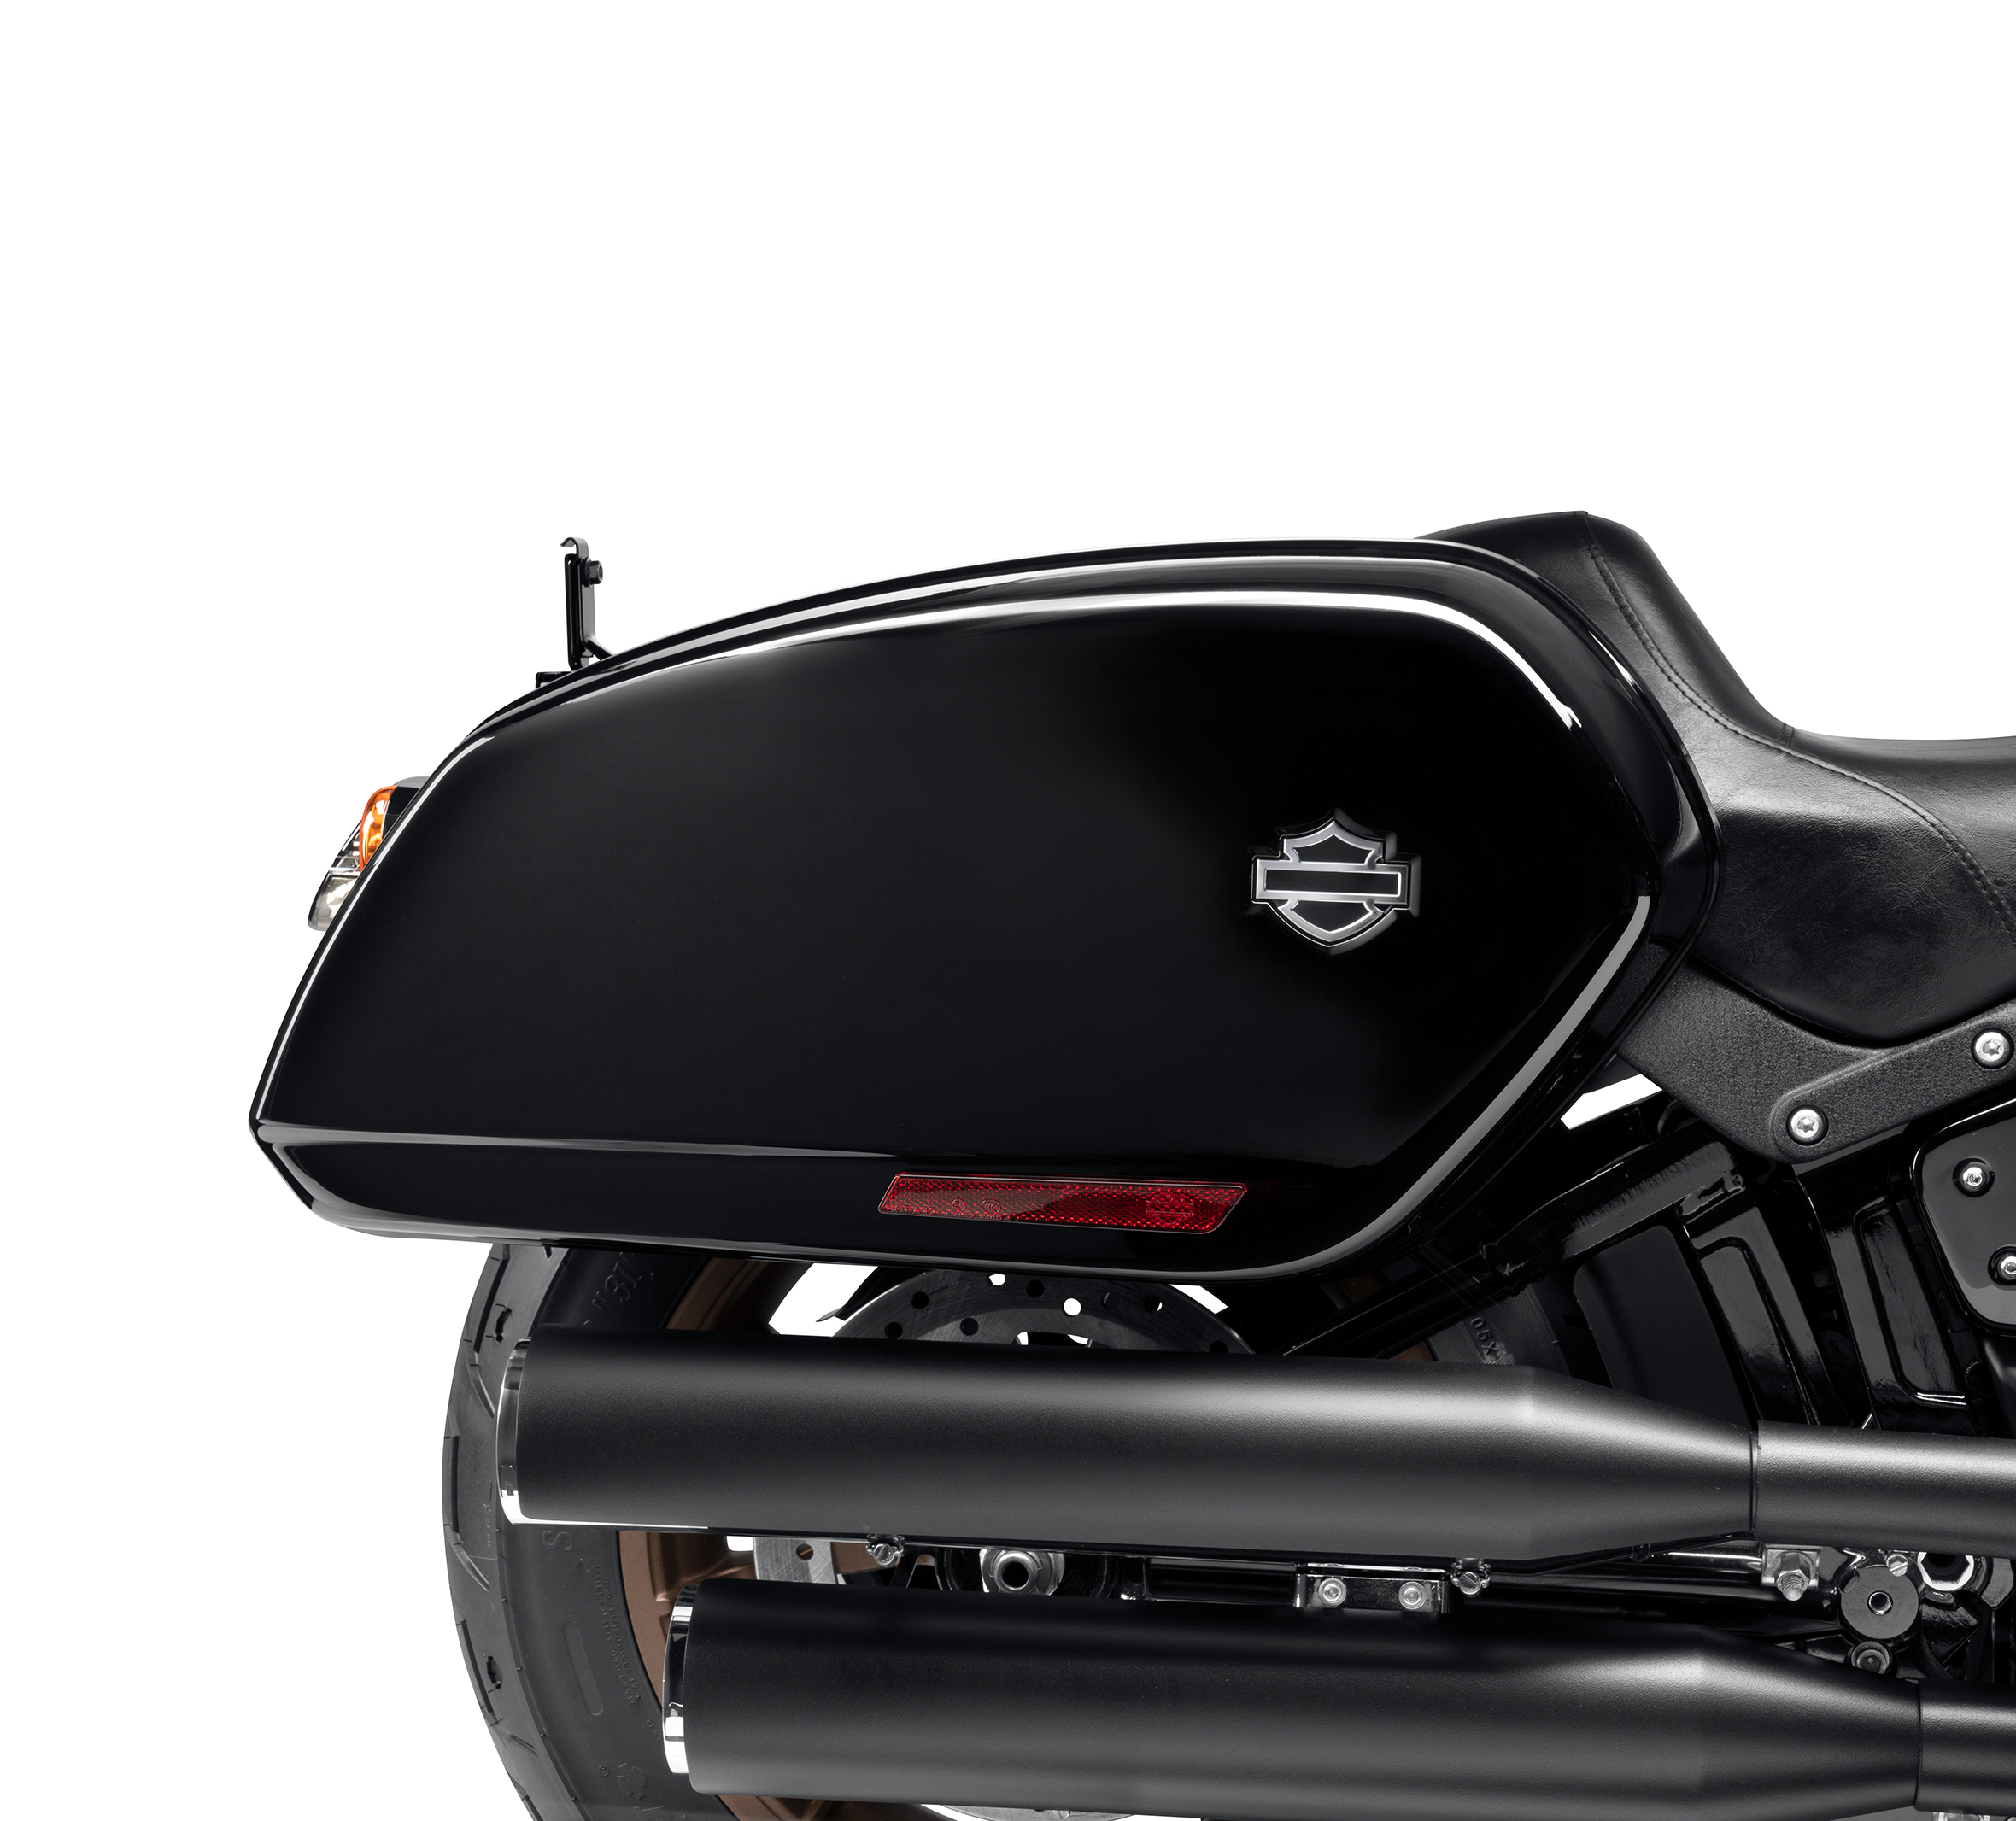 Motorcycle Saddlebag for Harley Davidson Dyna, prices and photos